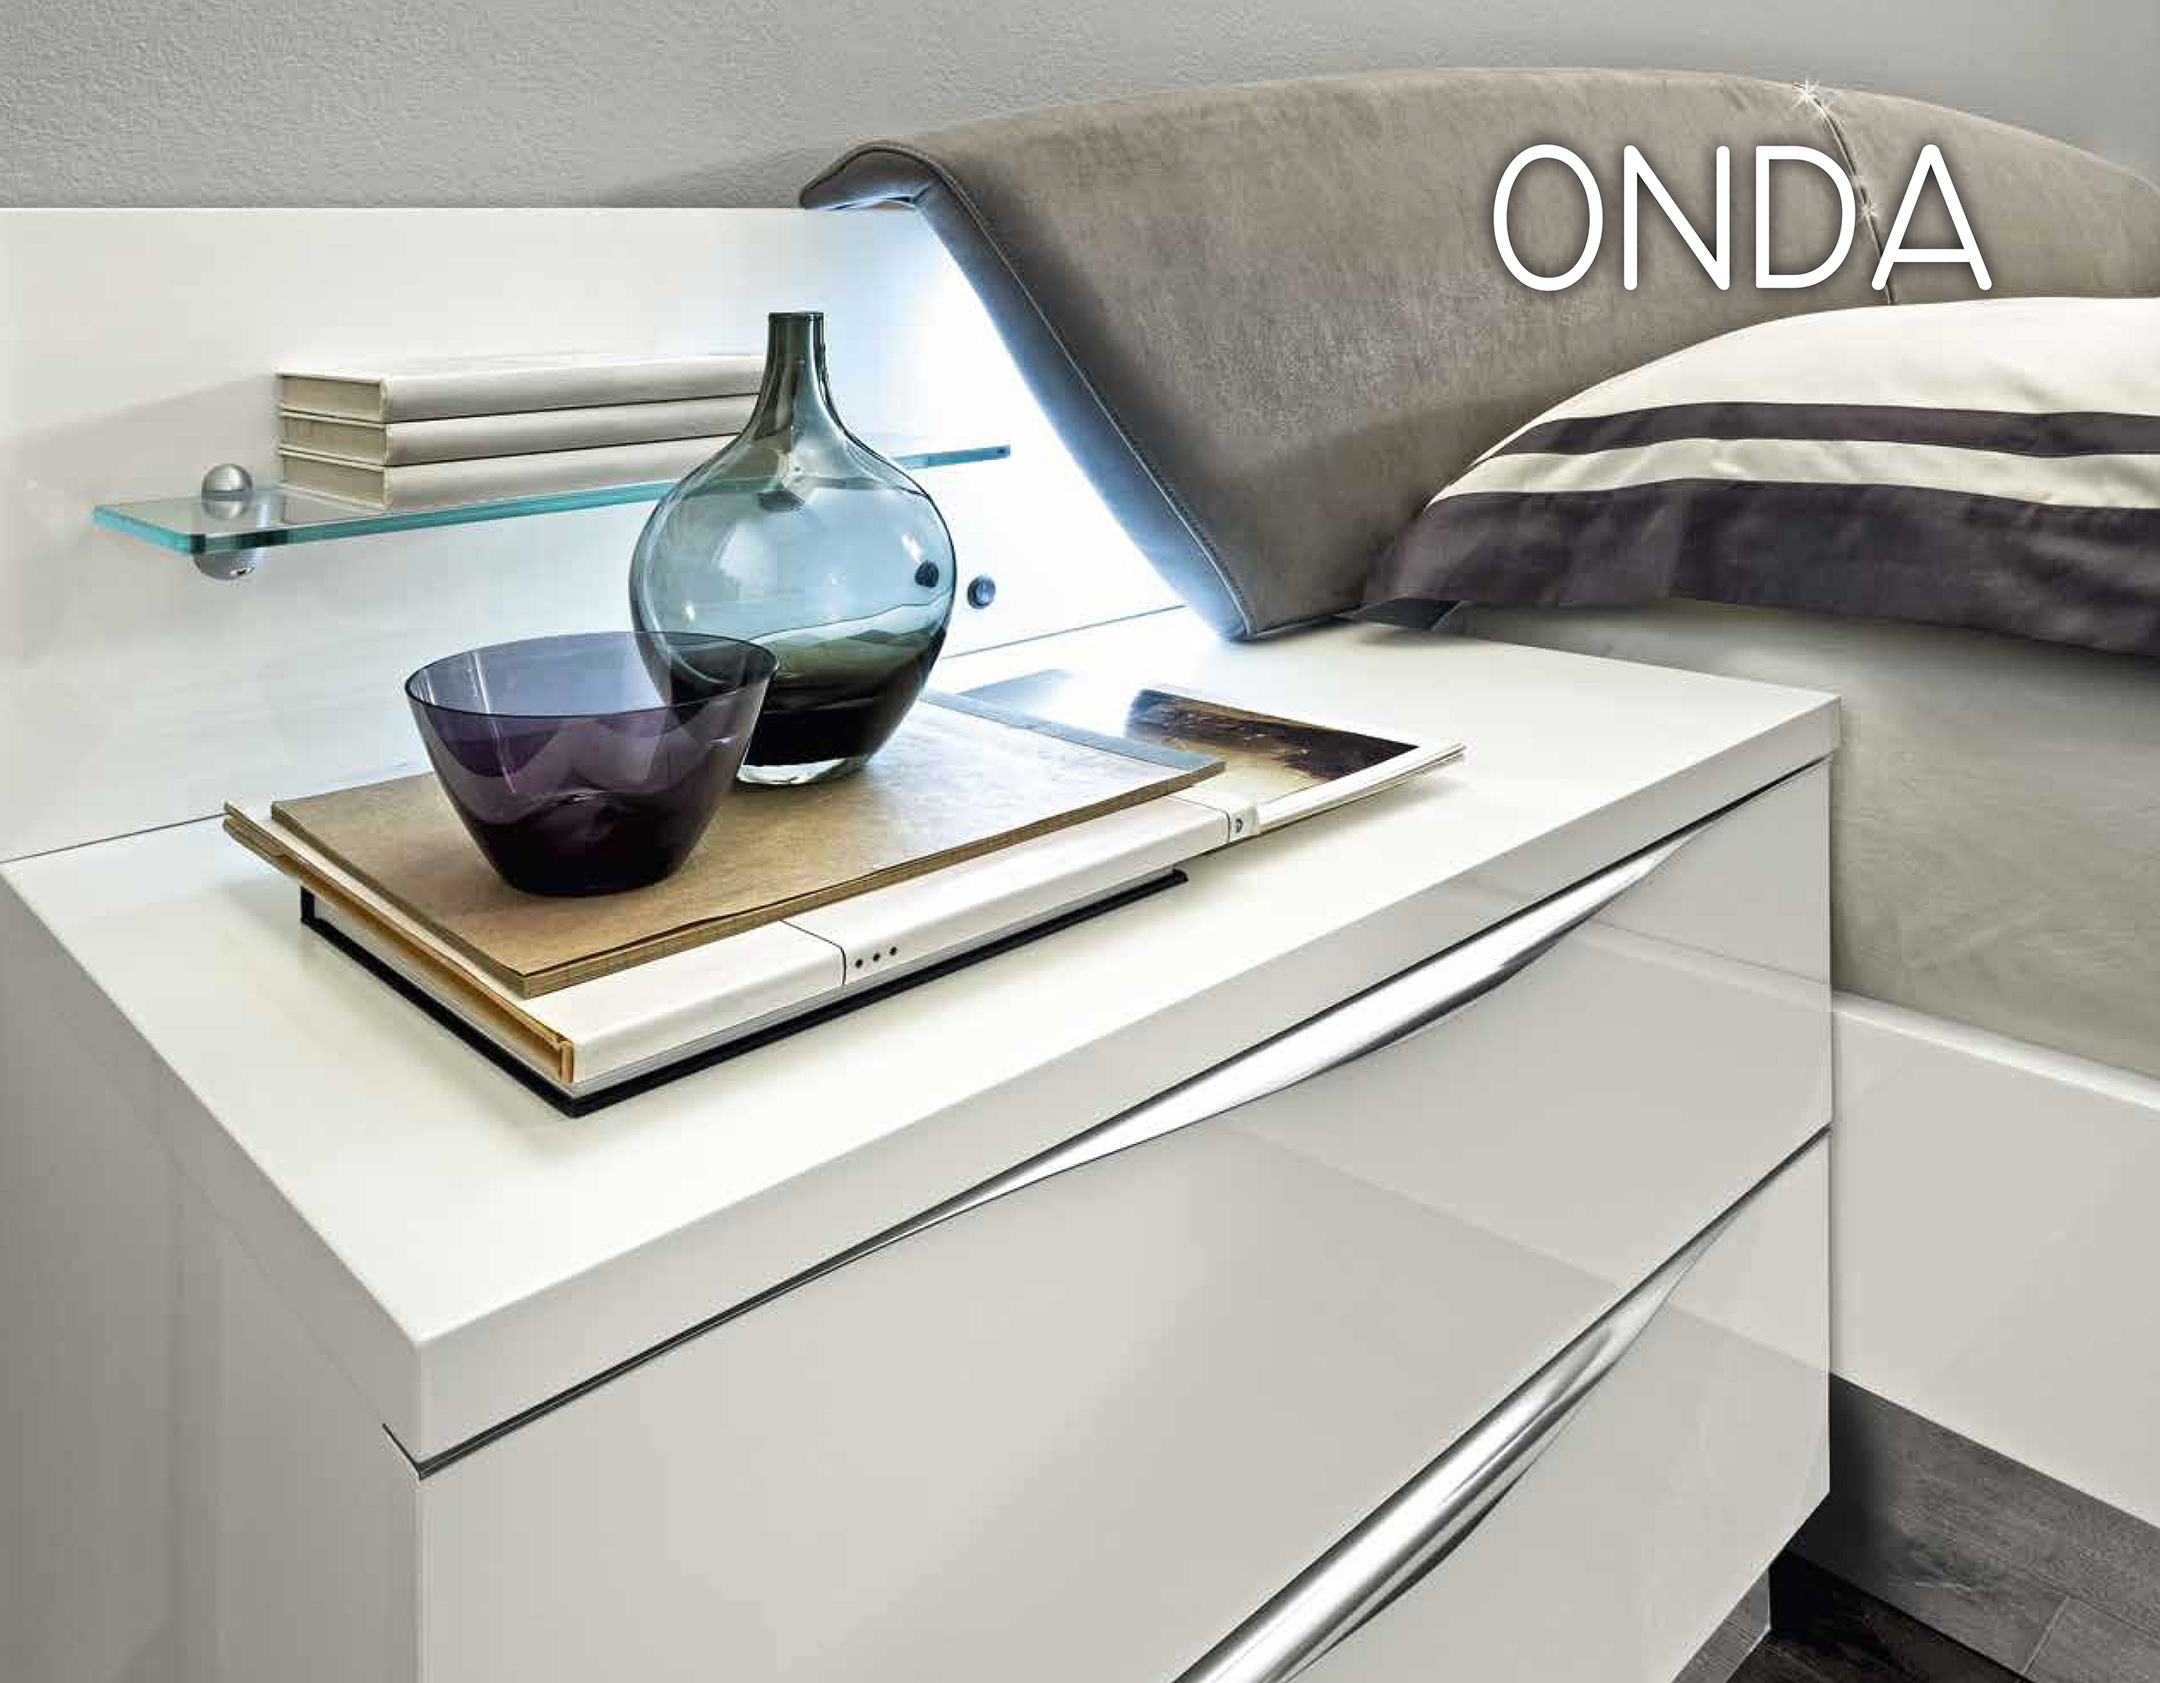 Bedroom Furniture Modern Bedrooms QS and KS Onda White Additional Items